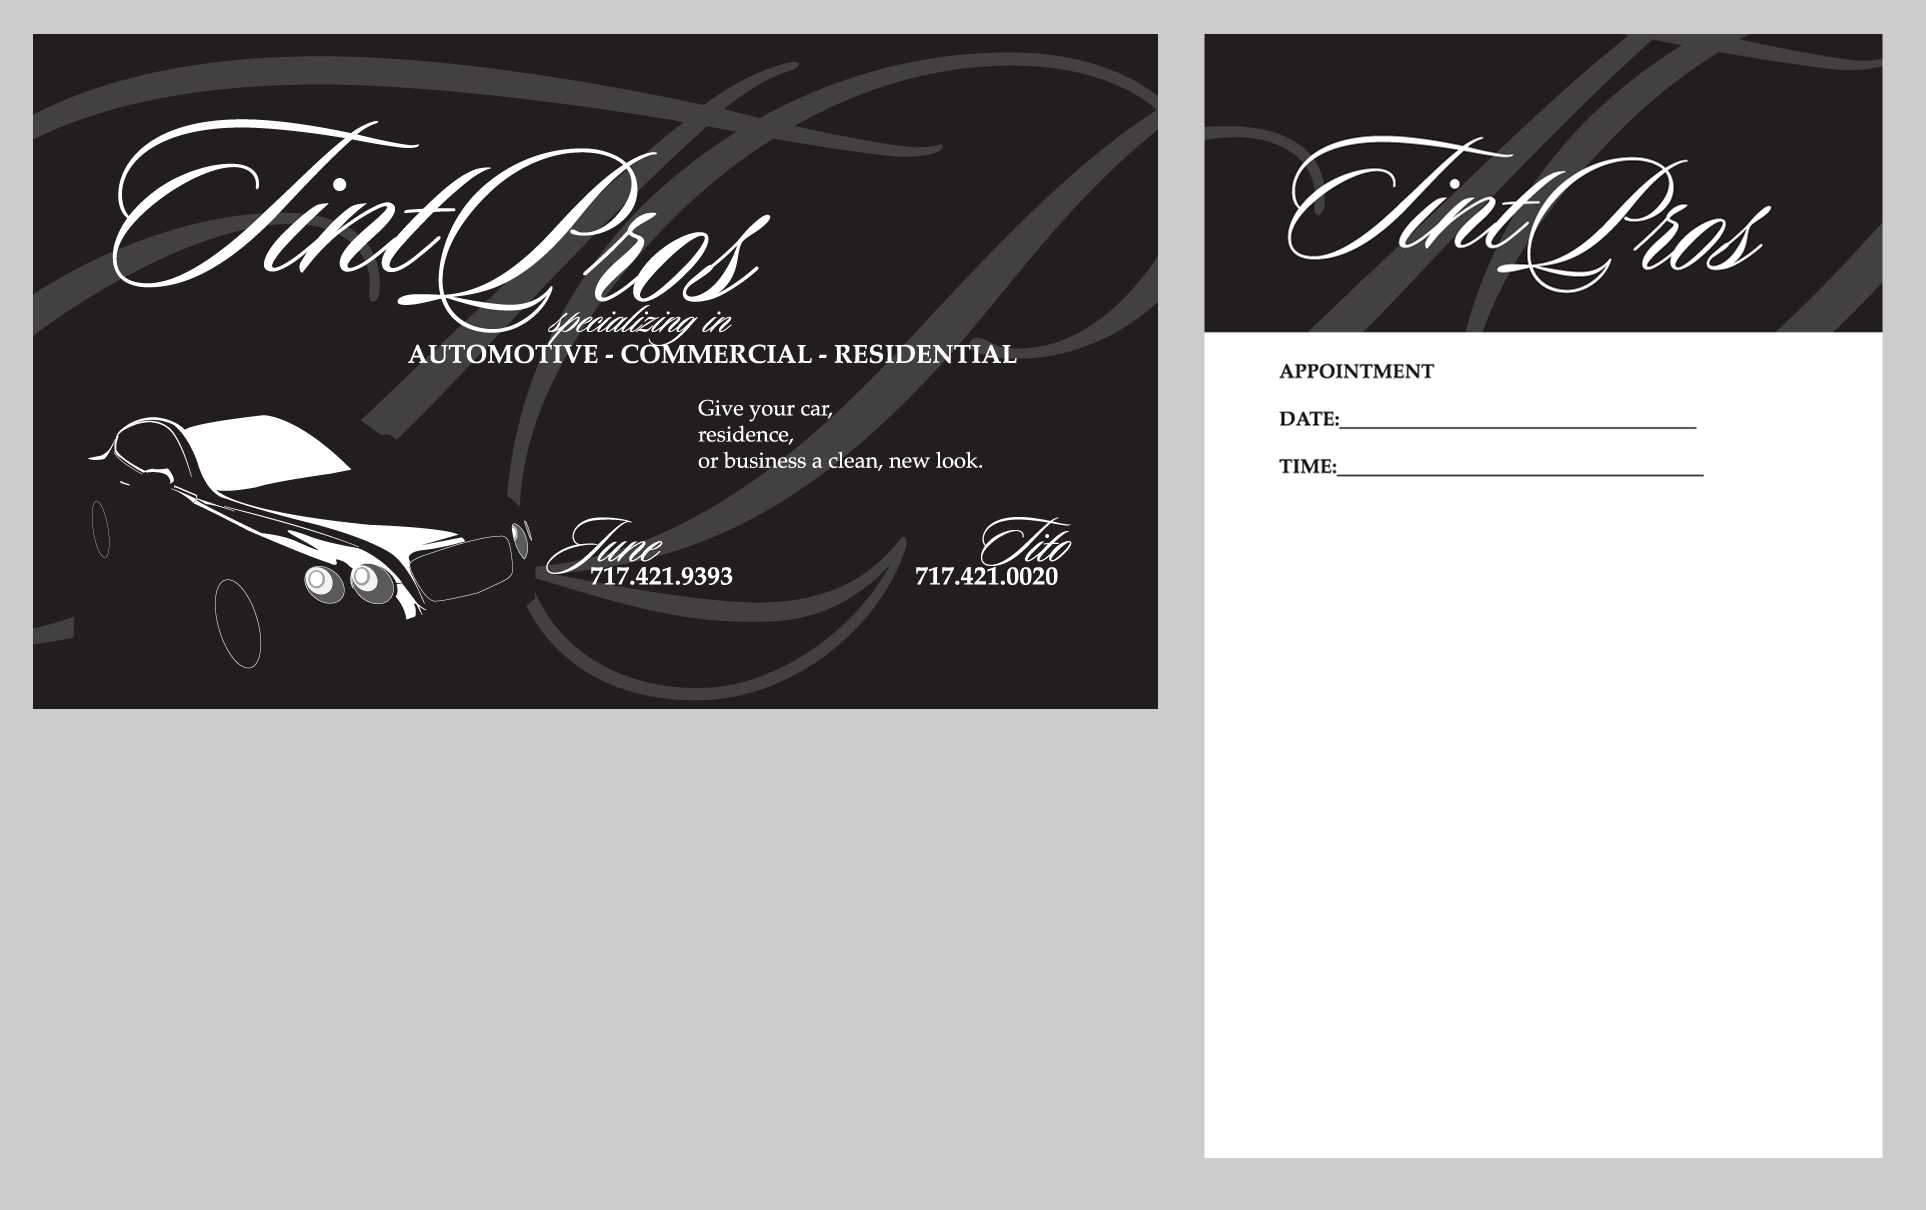 window tint business cards in Us 4